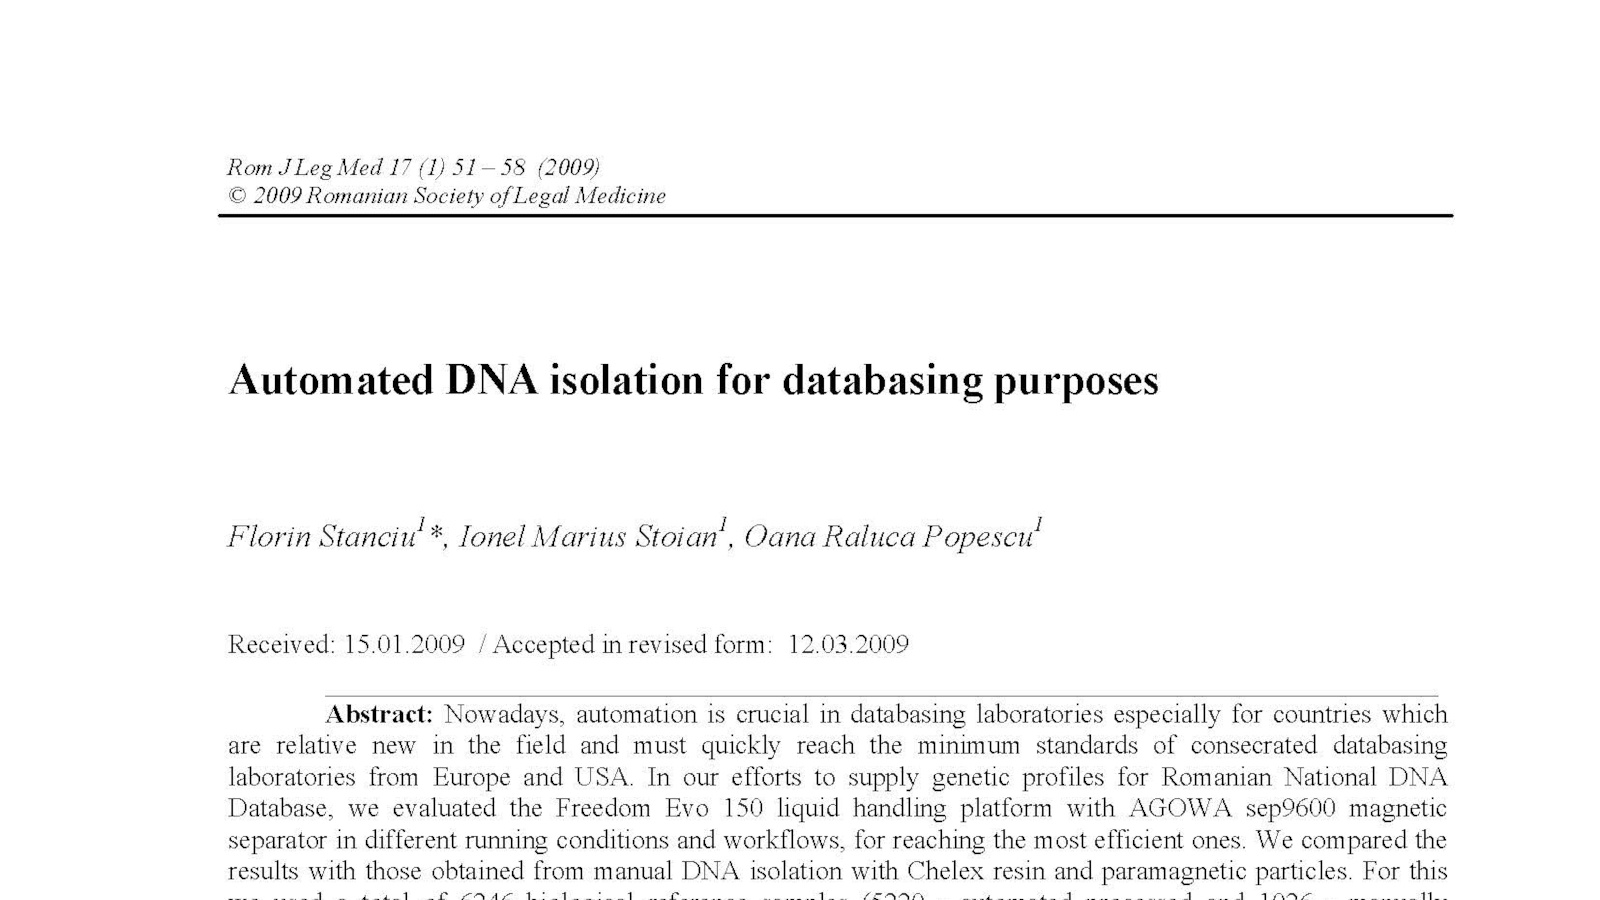 2009 - Automated DNA isolation for databasing purposes